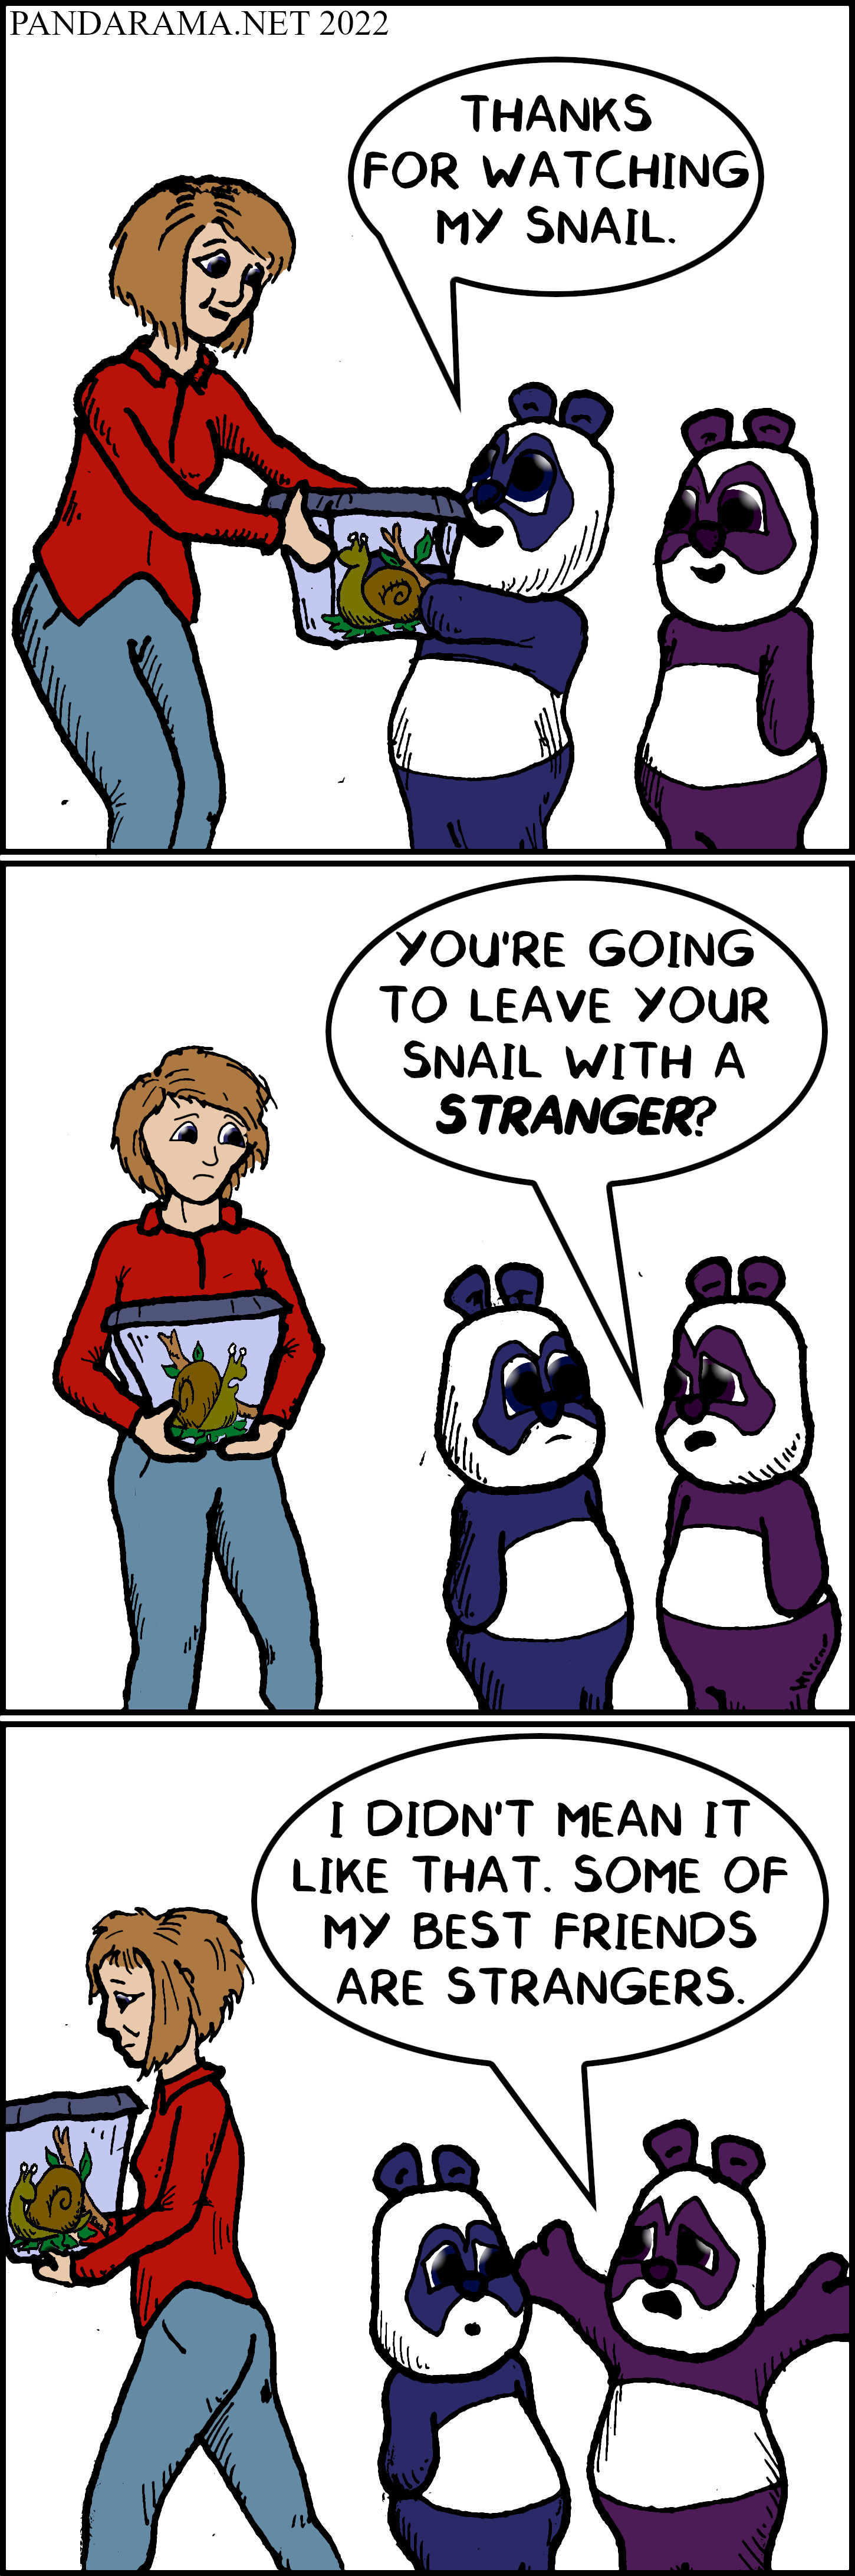 cartoon where pandAS Have a pet snail. nothing against strangers, some of my best friends are strangers.'